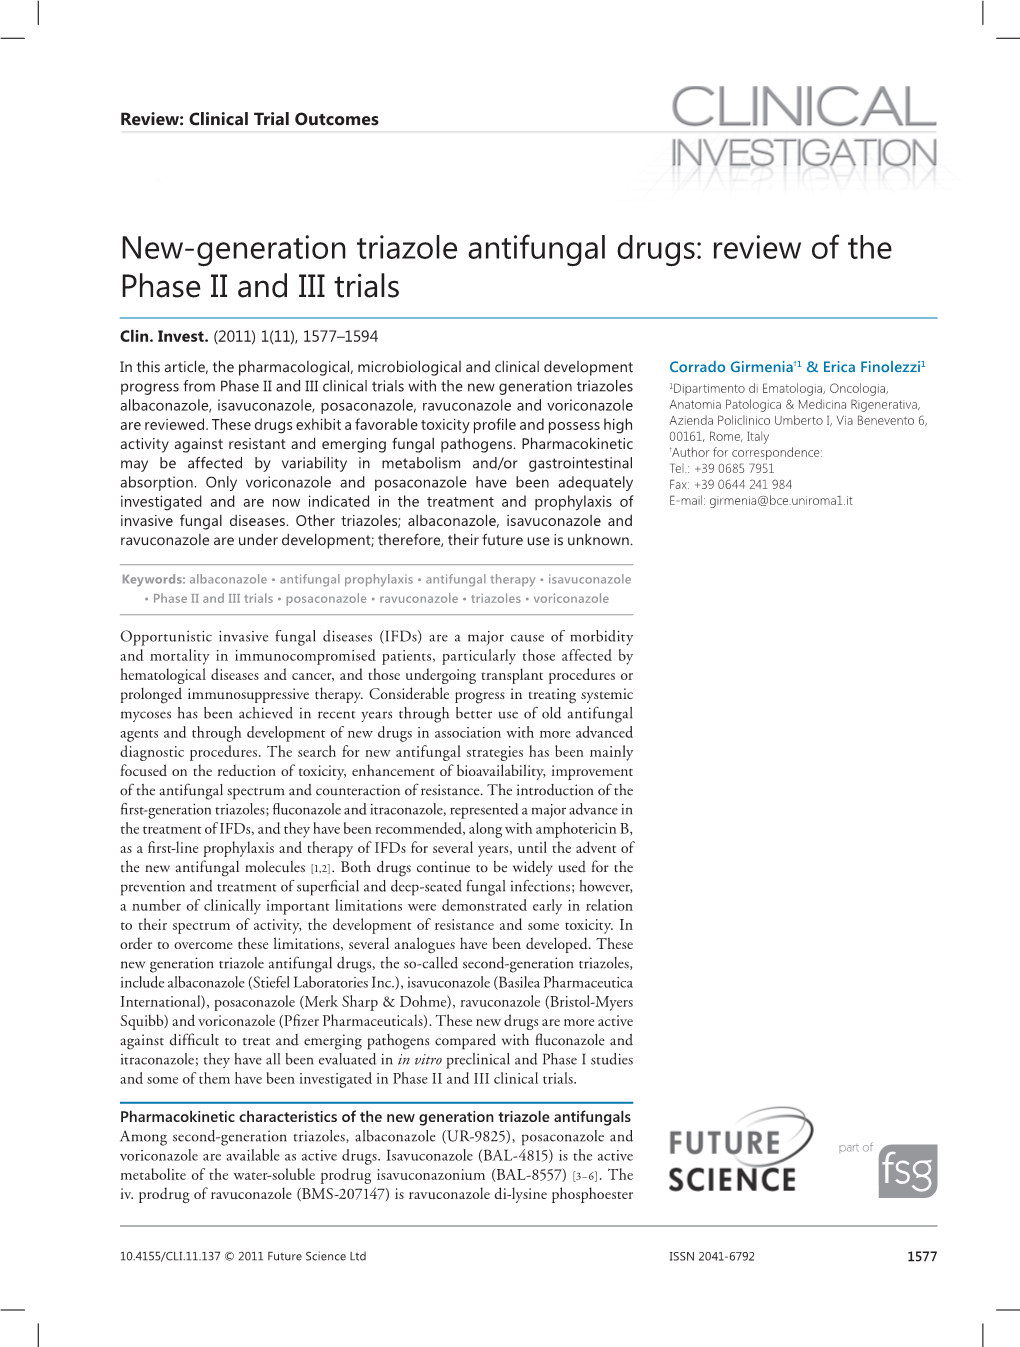 New-Generation Triazole Antifungal Drugs: Review of the Phase II and III Trials